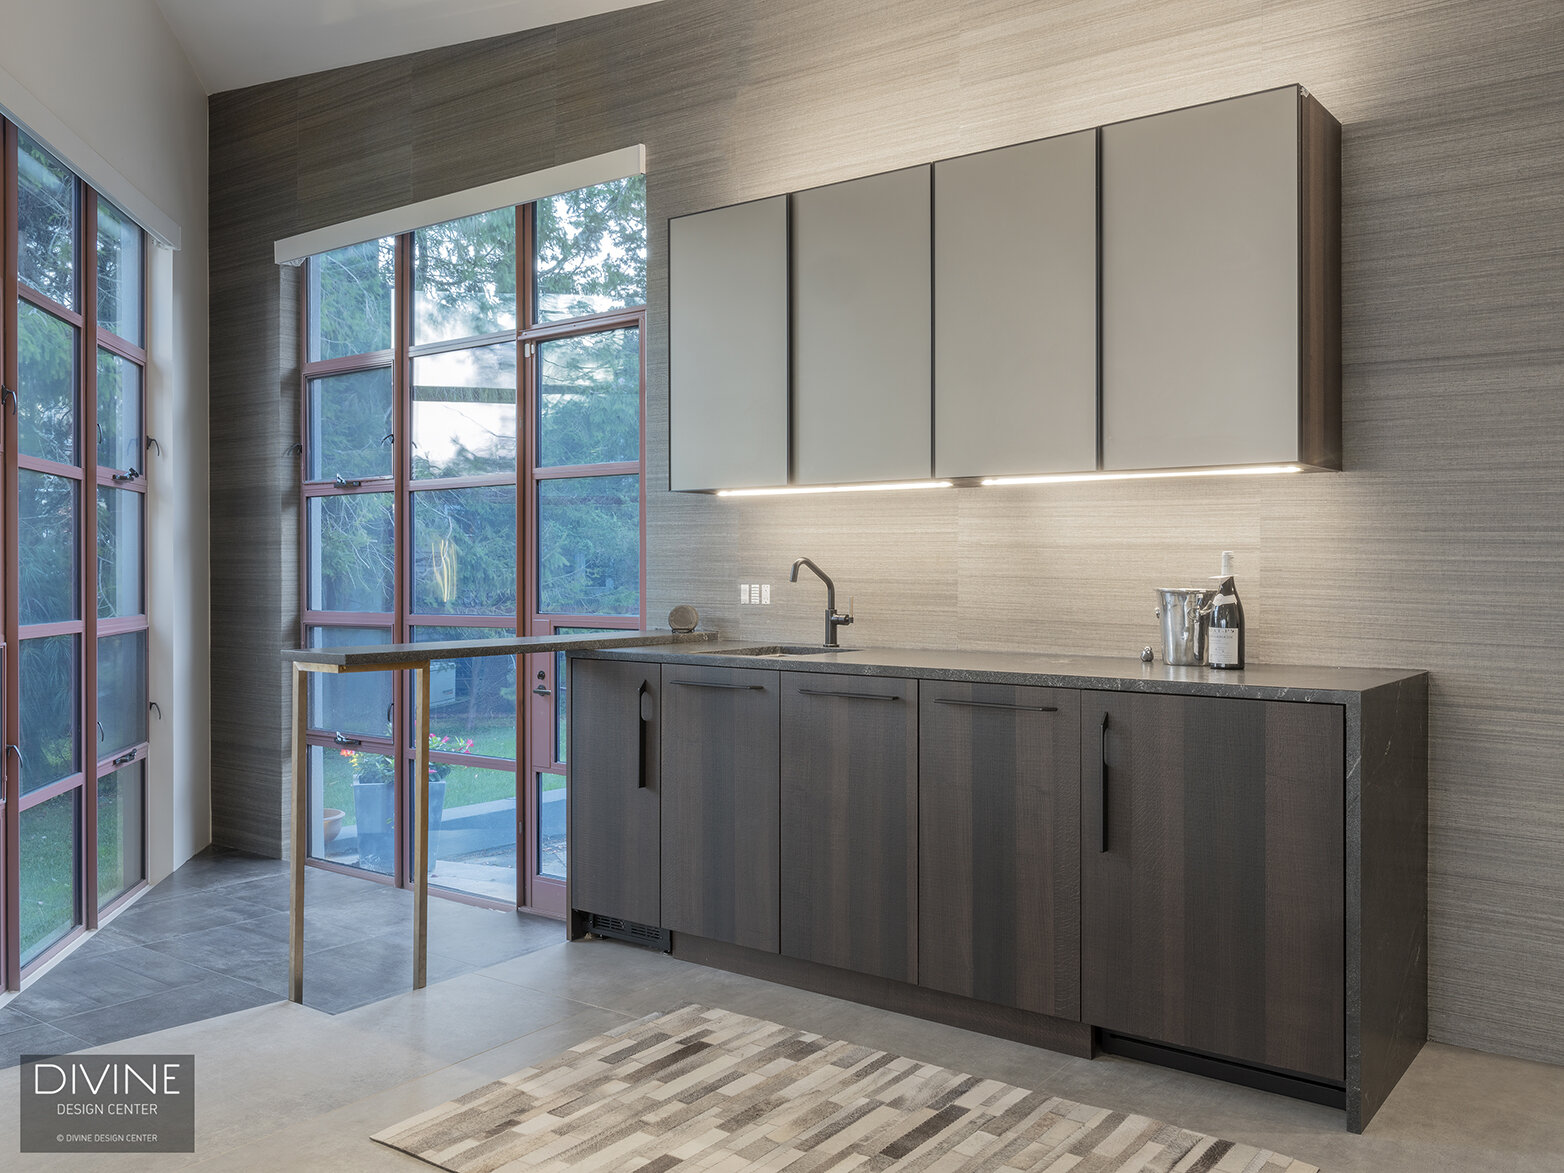  Modern Leicht, grey wet bar with converging glass windows, floating upper cabinets, textured grey wood lower cabinets and undercabinet lighting illuminate the space.  